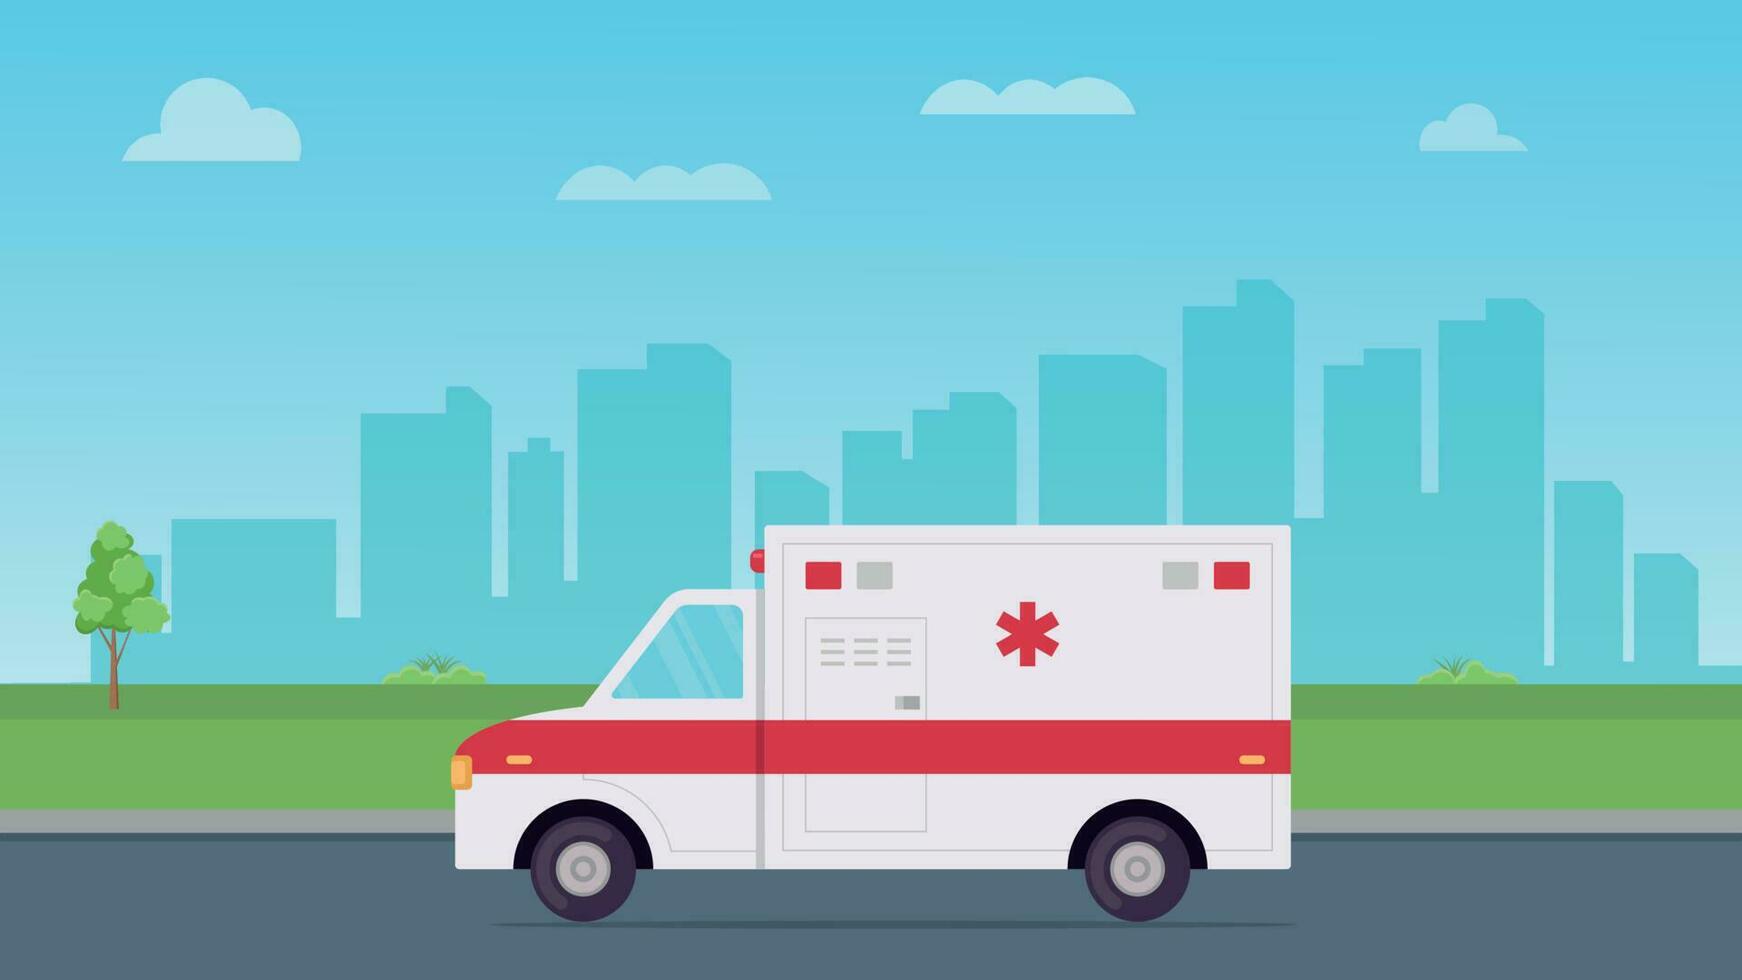 Emergency ambulance running on a road in town flat vector illustration